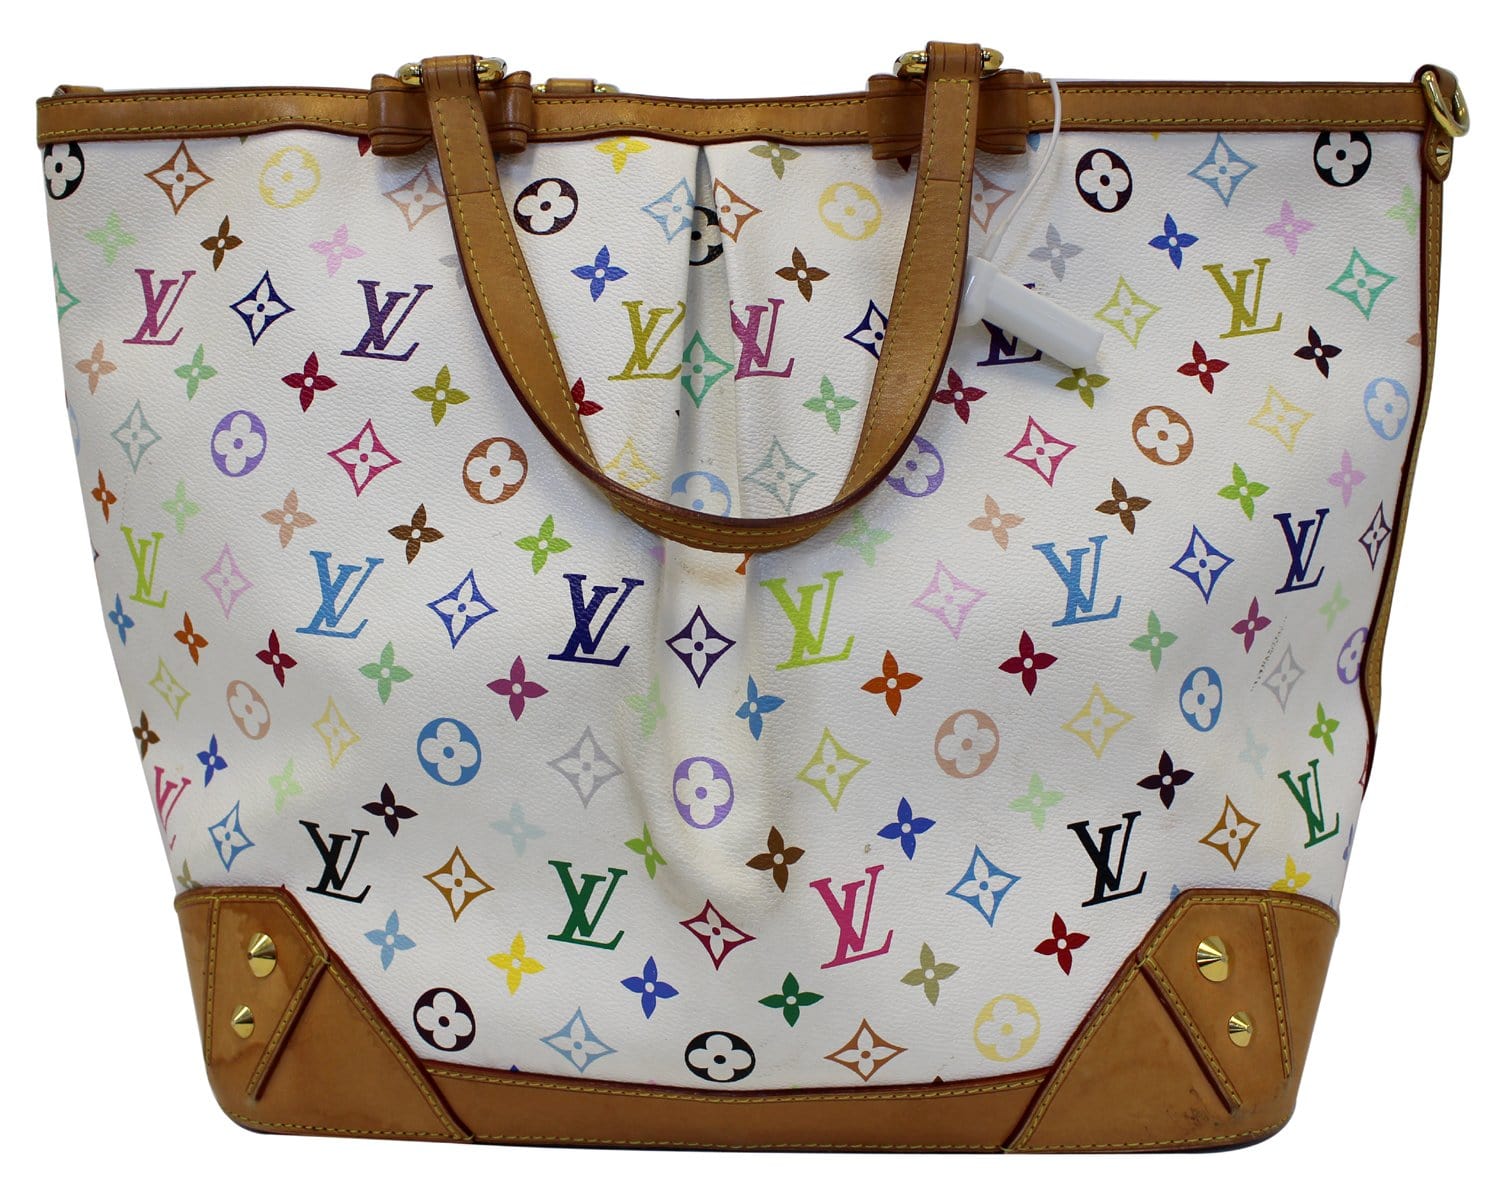 Louis Vuitton Multicolore Monogram Collection: Your Guide to One